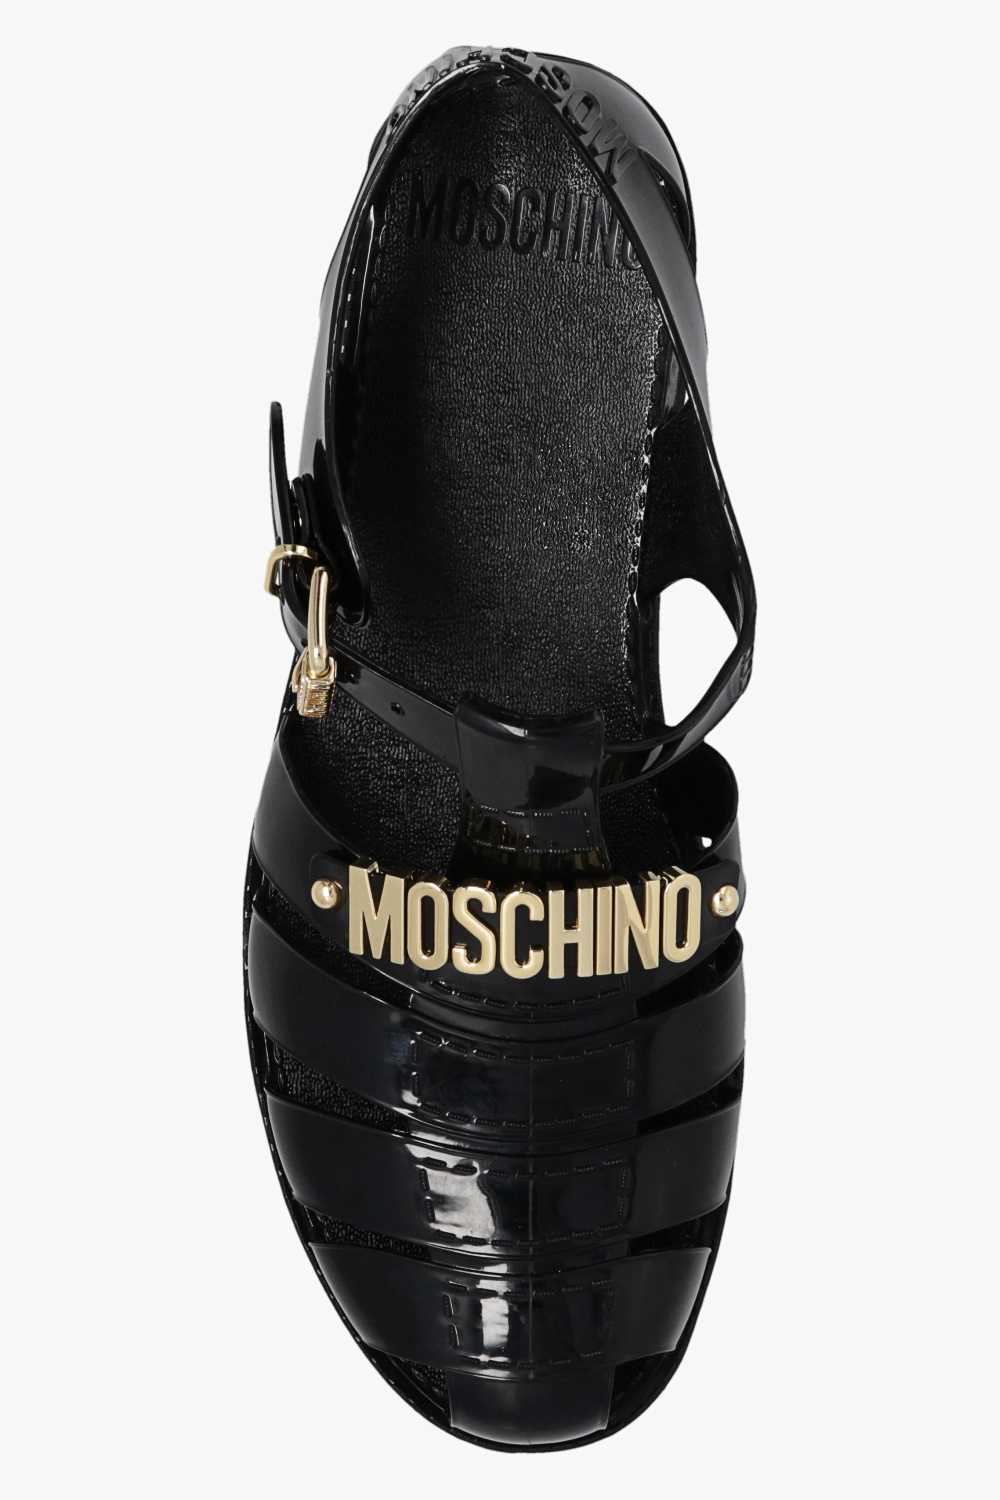 Moschino Rubber sandals with logo